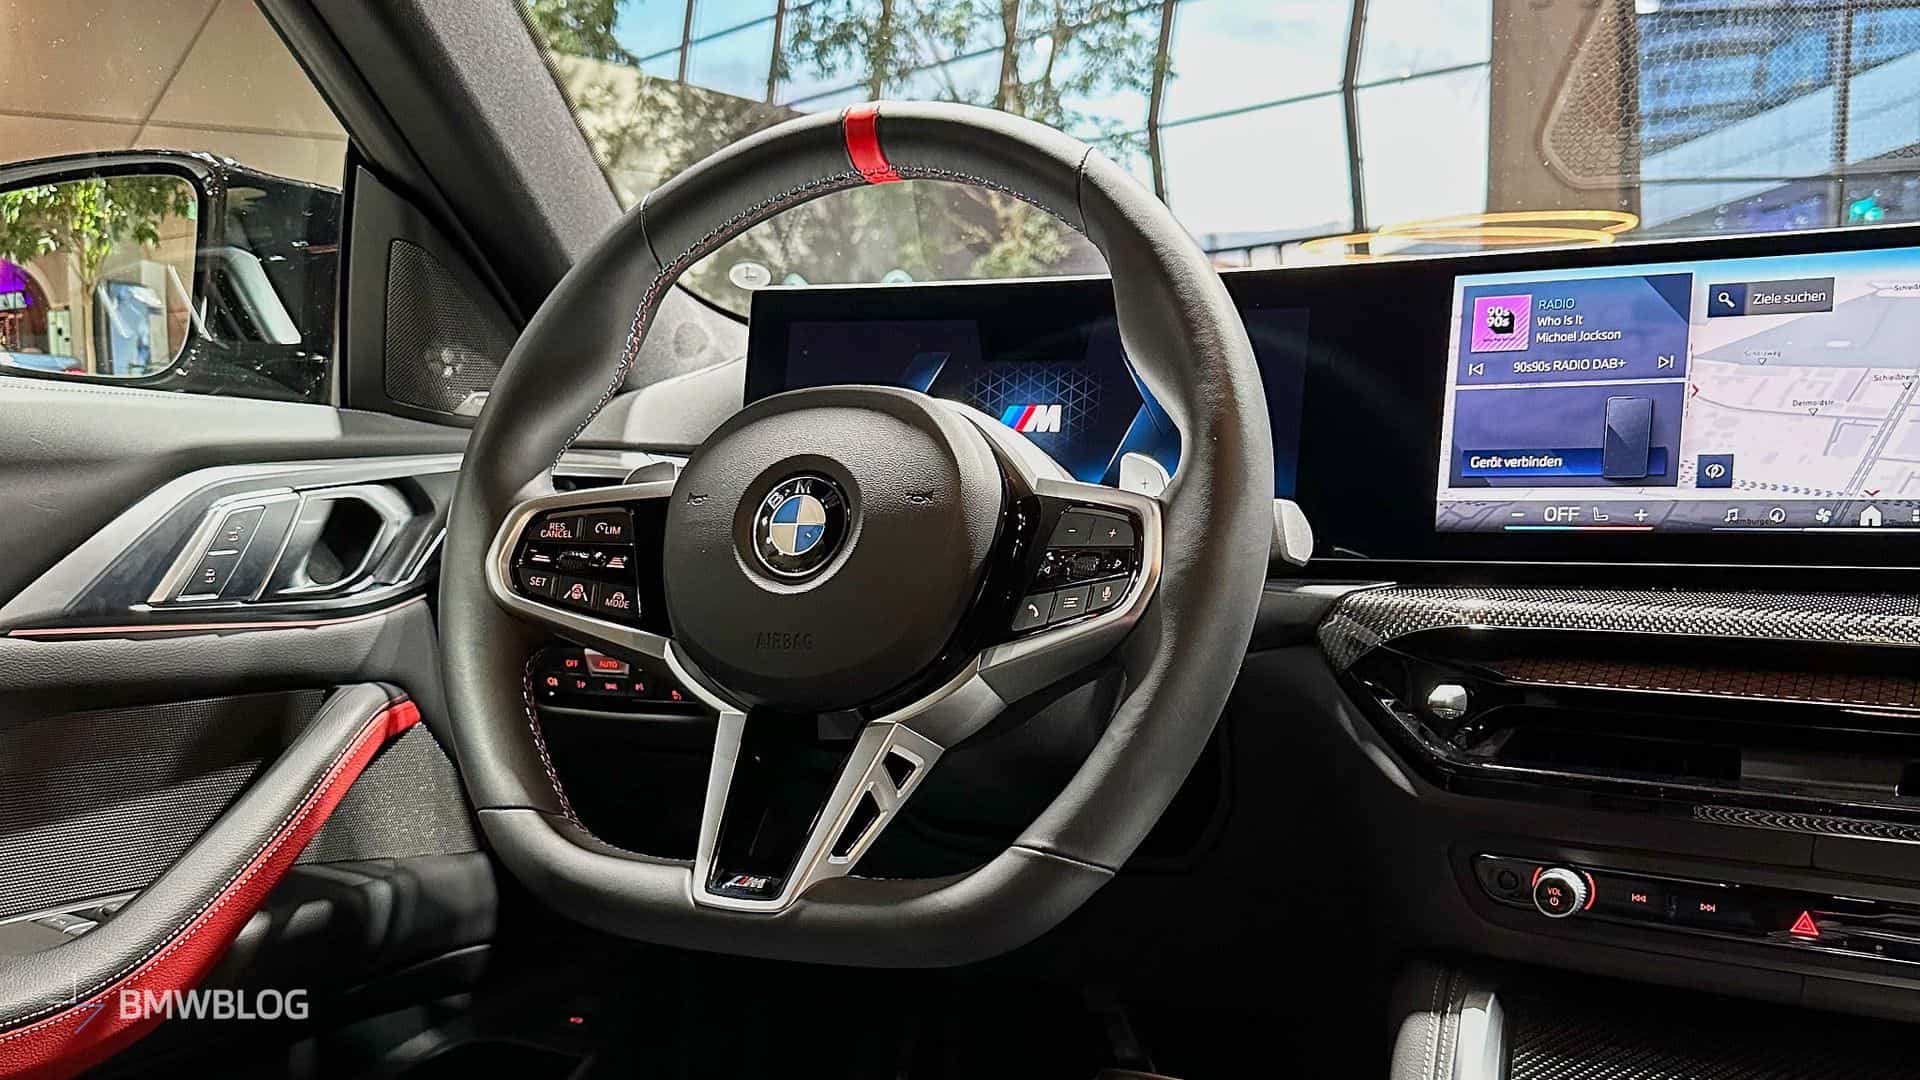 Here's BMW New Flat-Bottomed M Steering Wheel